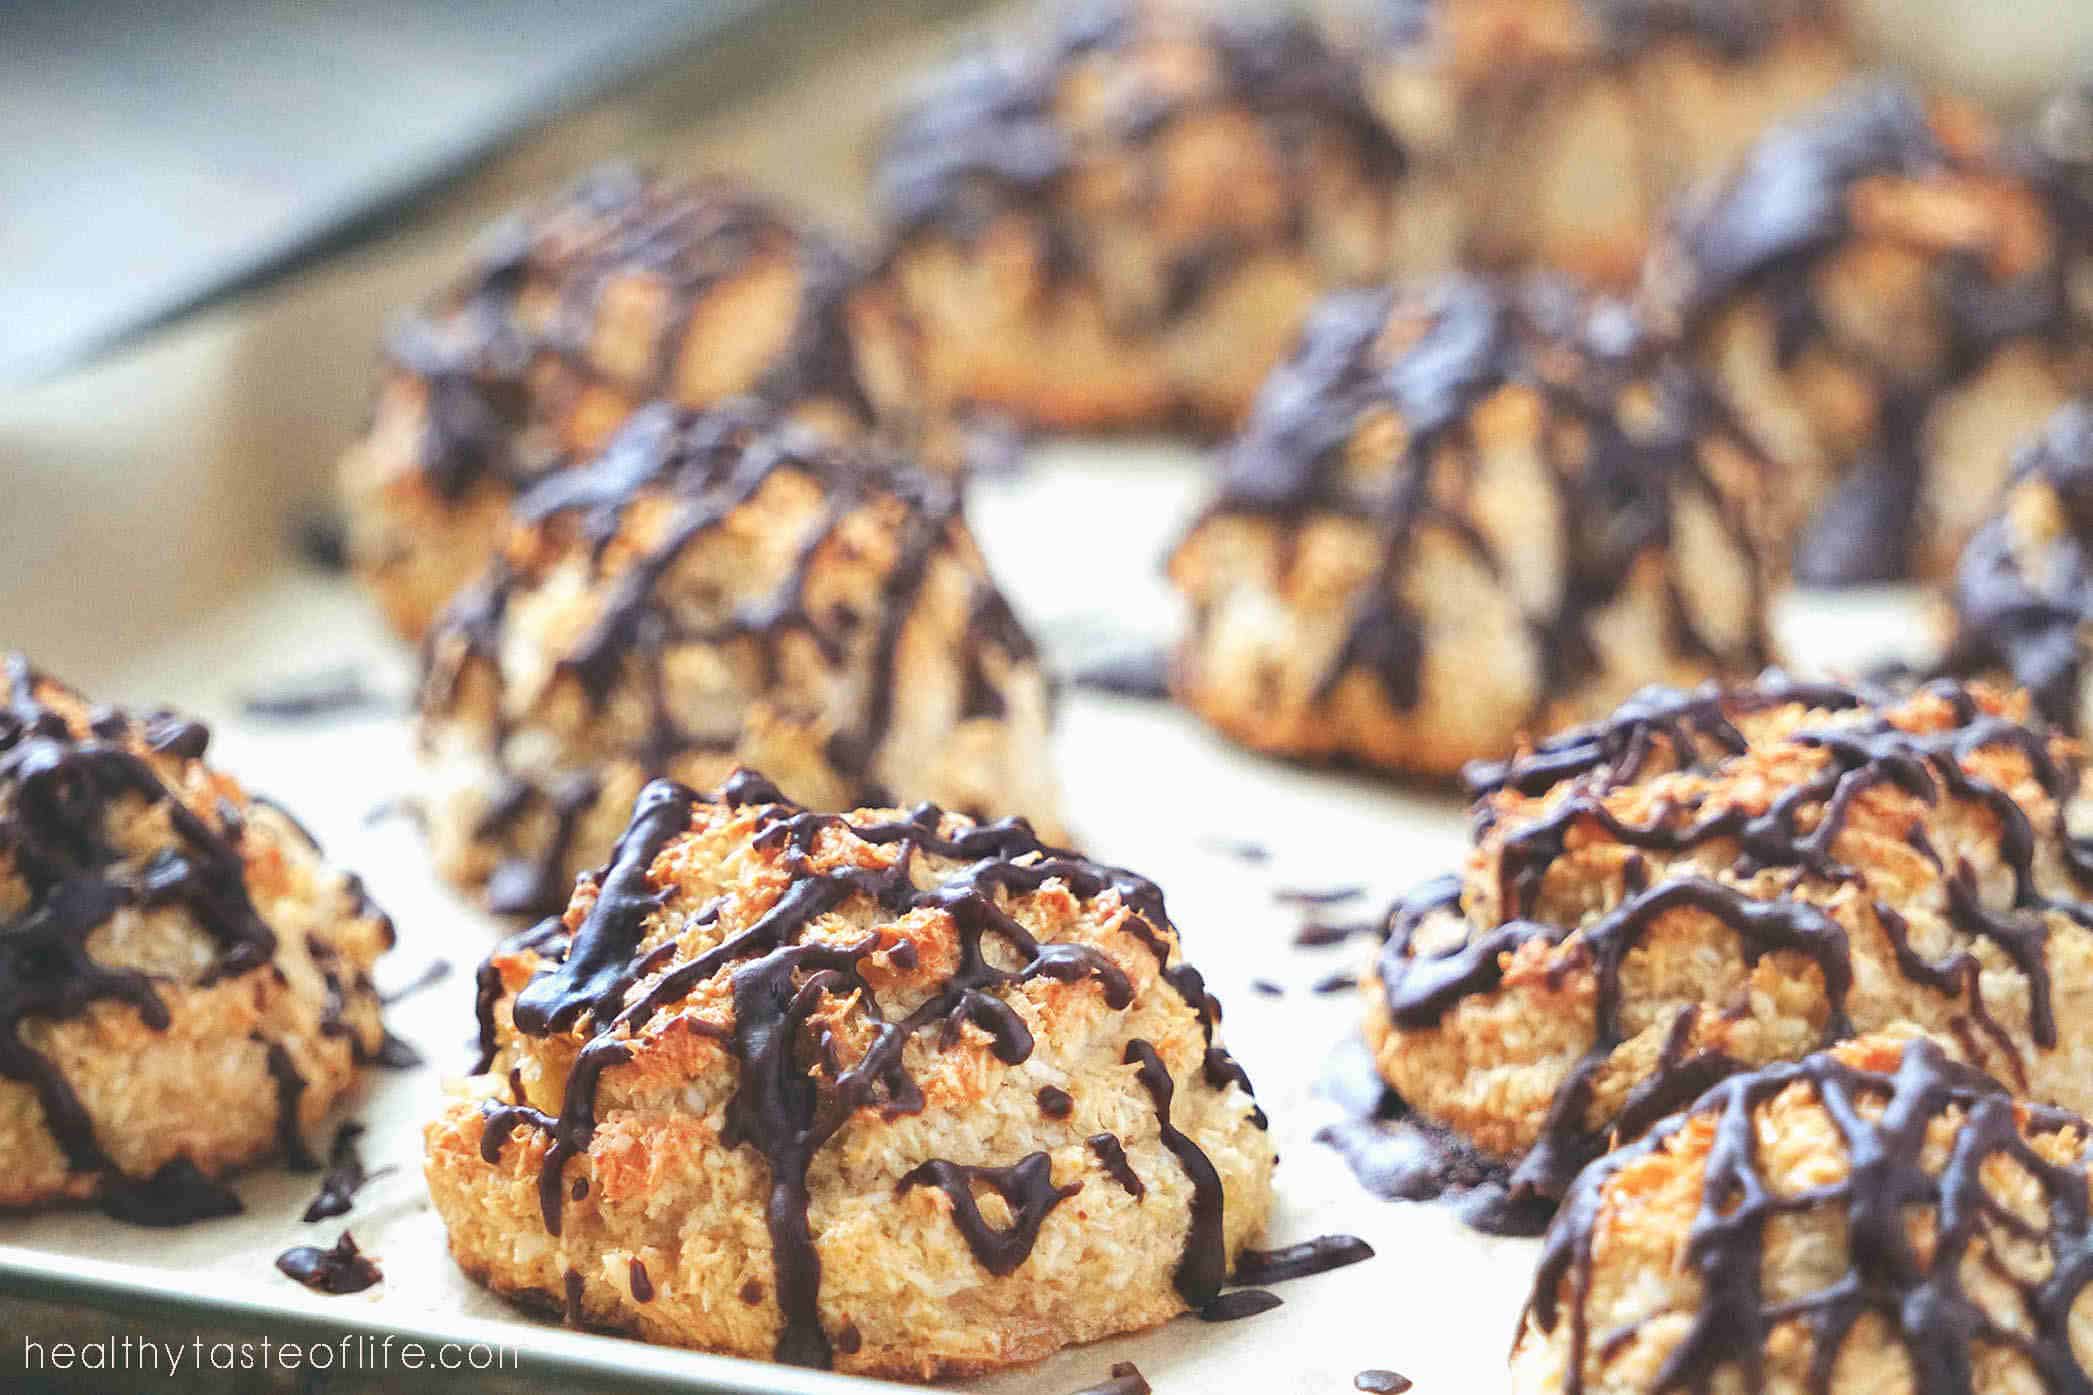 Chewy - soft, moist dairy free gluten free coconut macaroons without flour or condensed milk with chocolate drizzle.